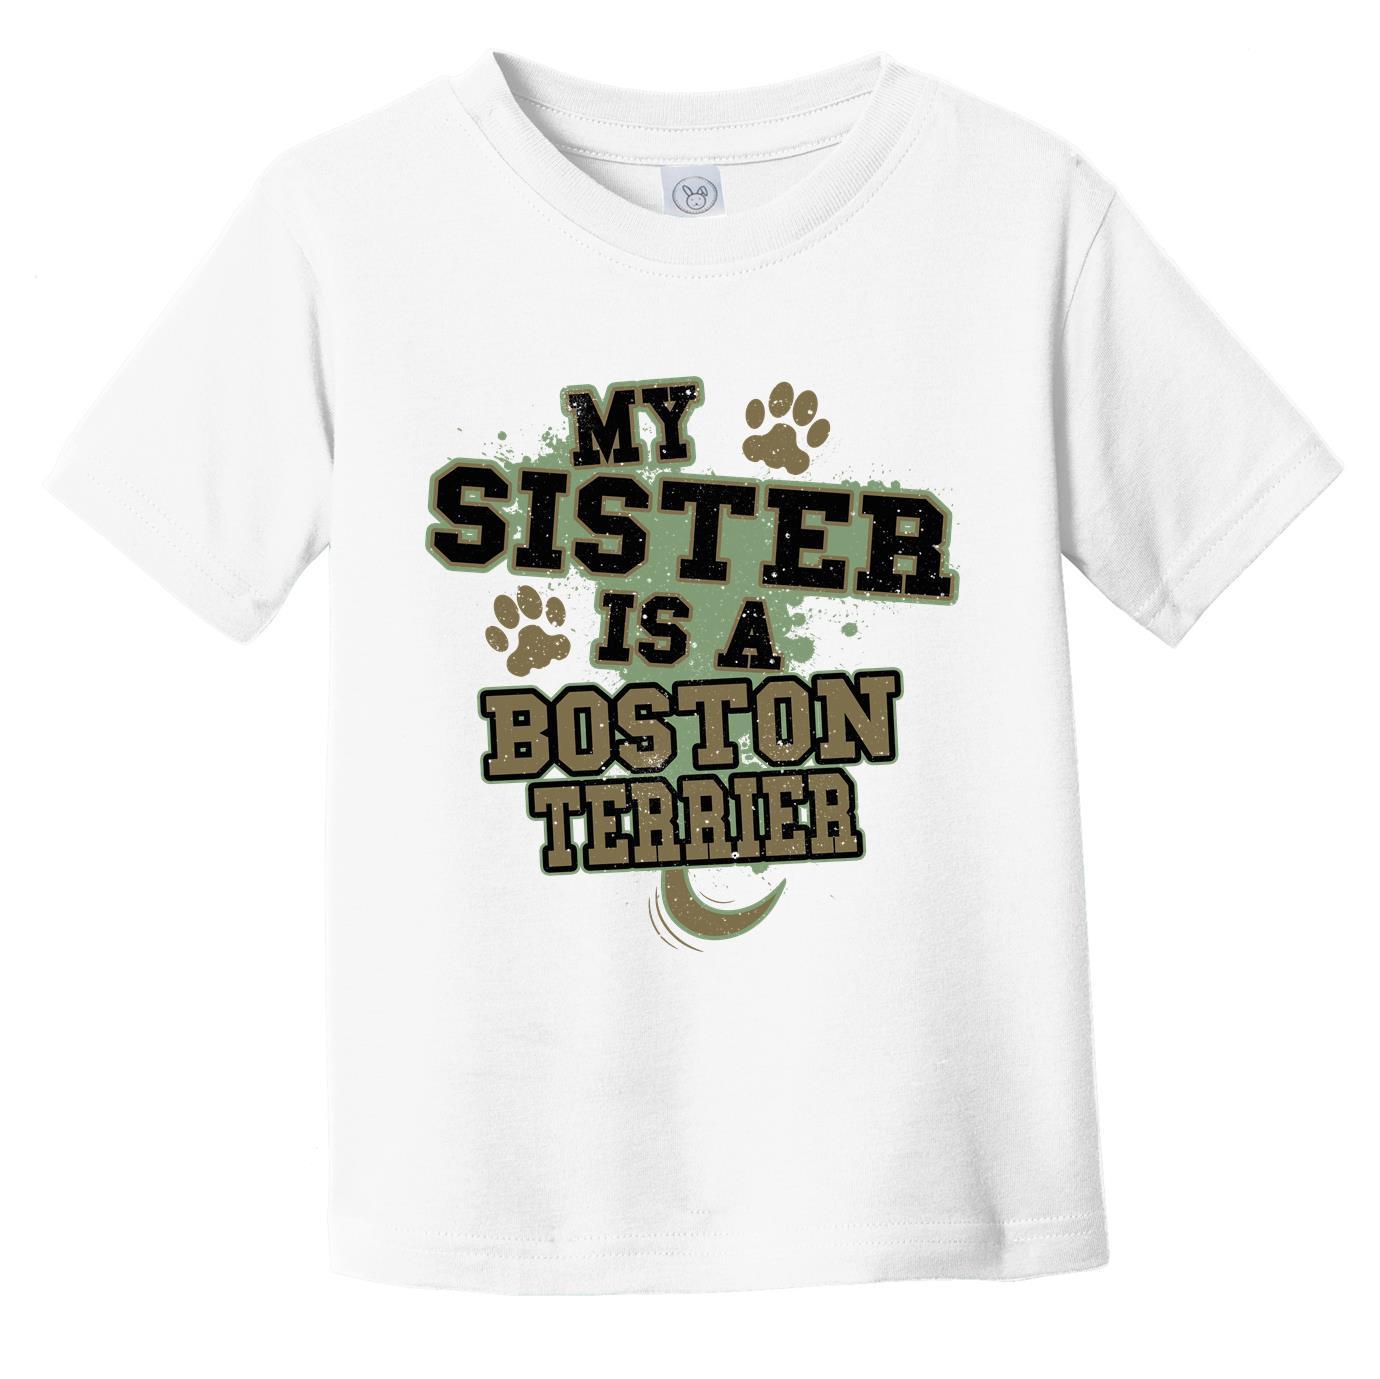 My Sister Is A Boston Terrier Funny Dog Infant Toddler T-Shirt